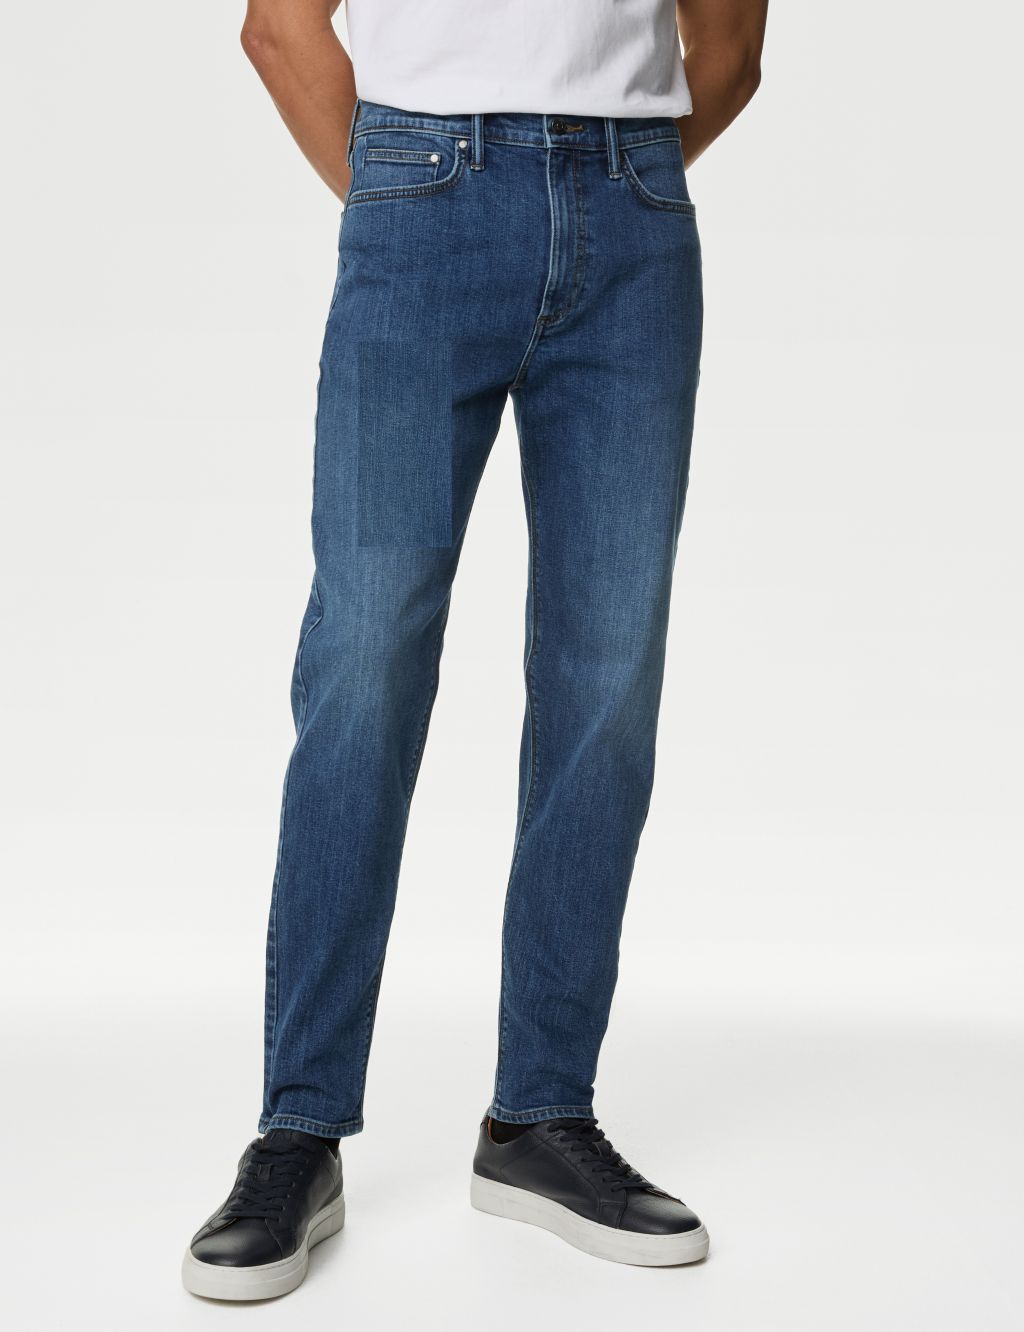 Tapered Fit Stretch Jeans image 1